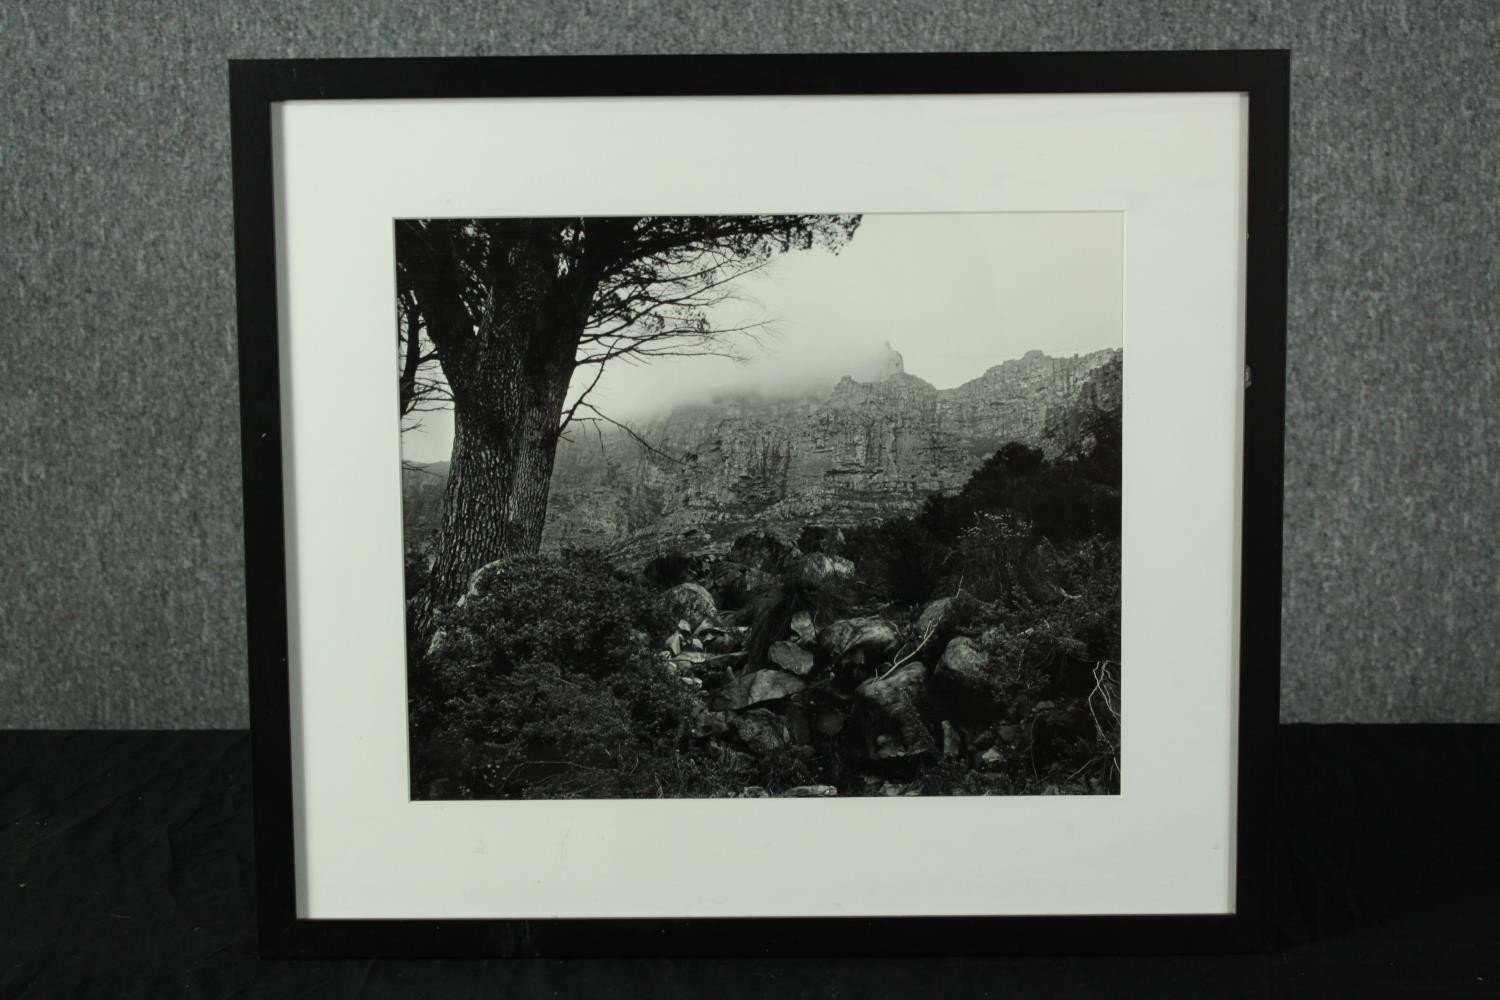 Photograph. Landscape, mountain scene. Framed and glazed. Unsigned. H.49 x W.56 cm. - Image 2 of 3